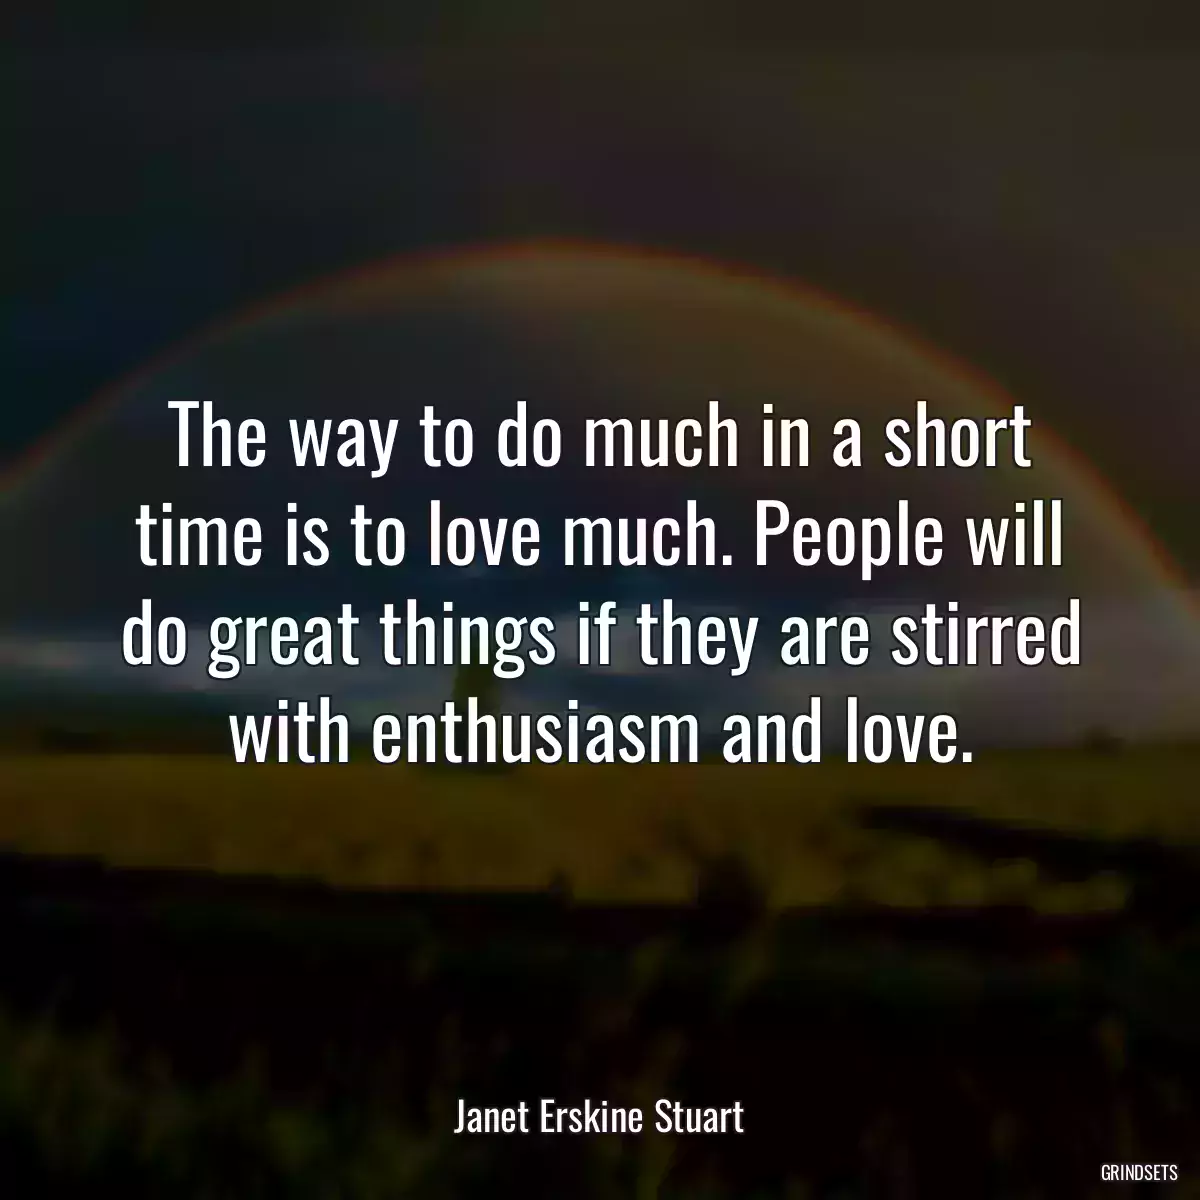 The way to do much in a short time is to love much. People will do great things if they are stirred with enthusiasm and love.